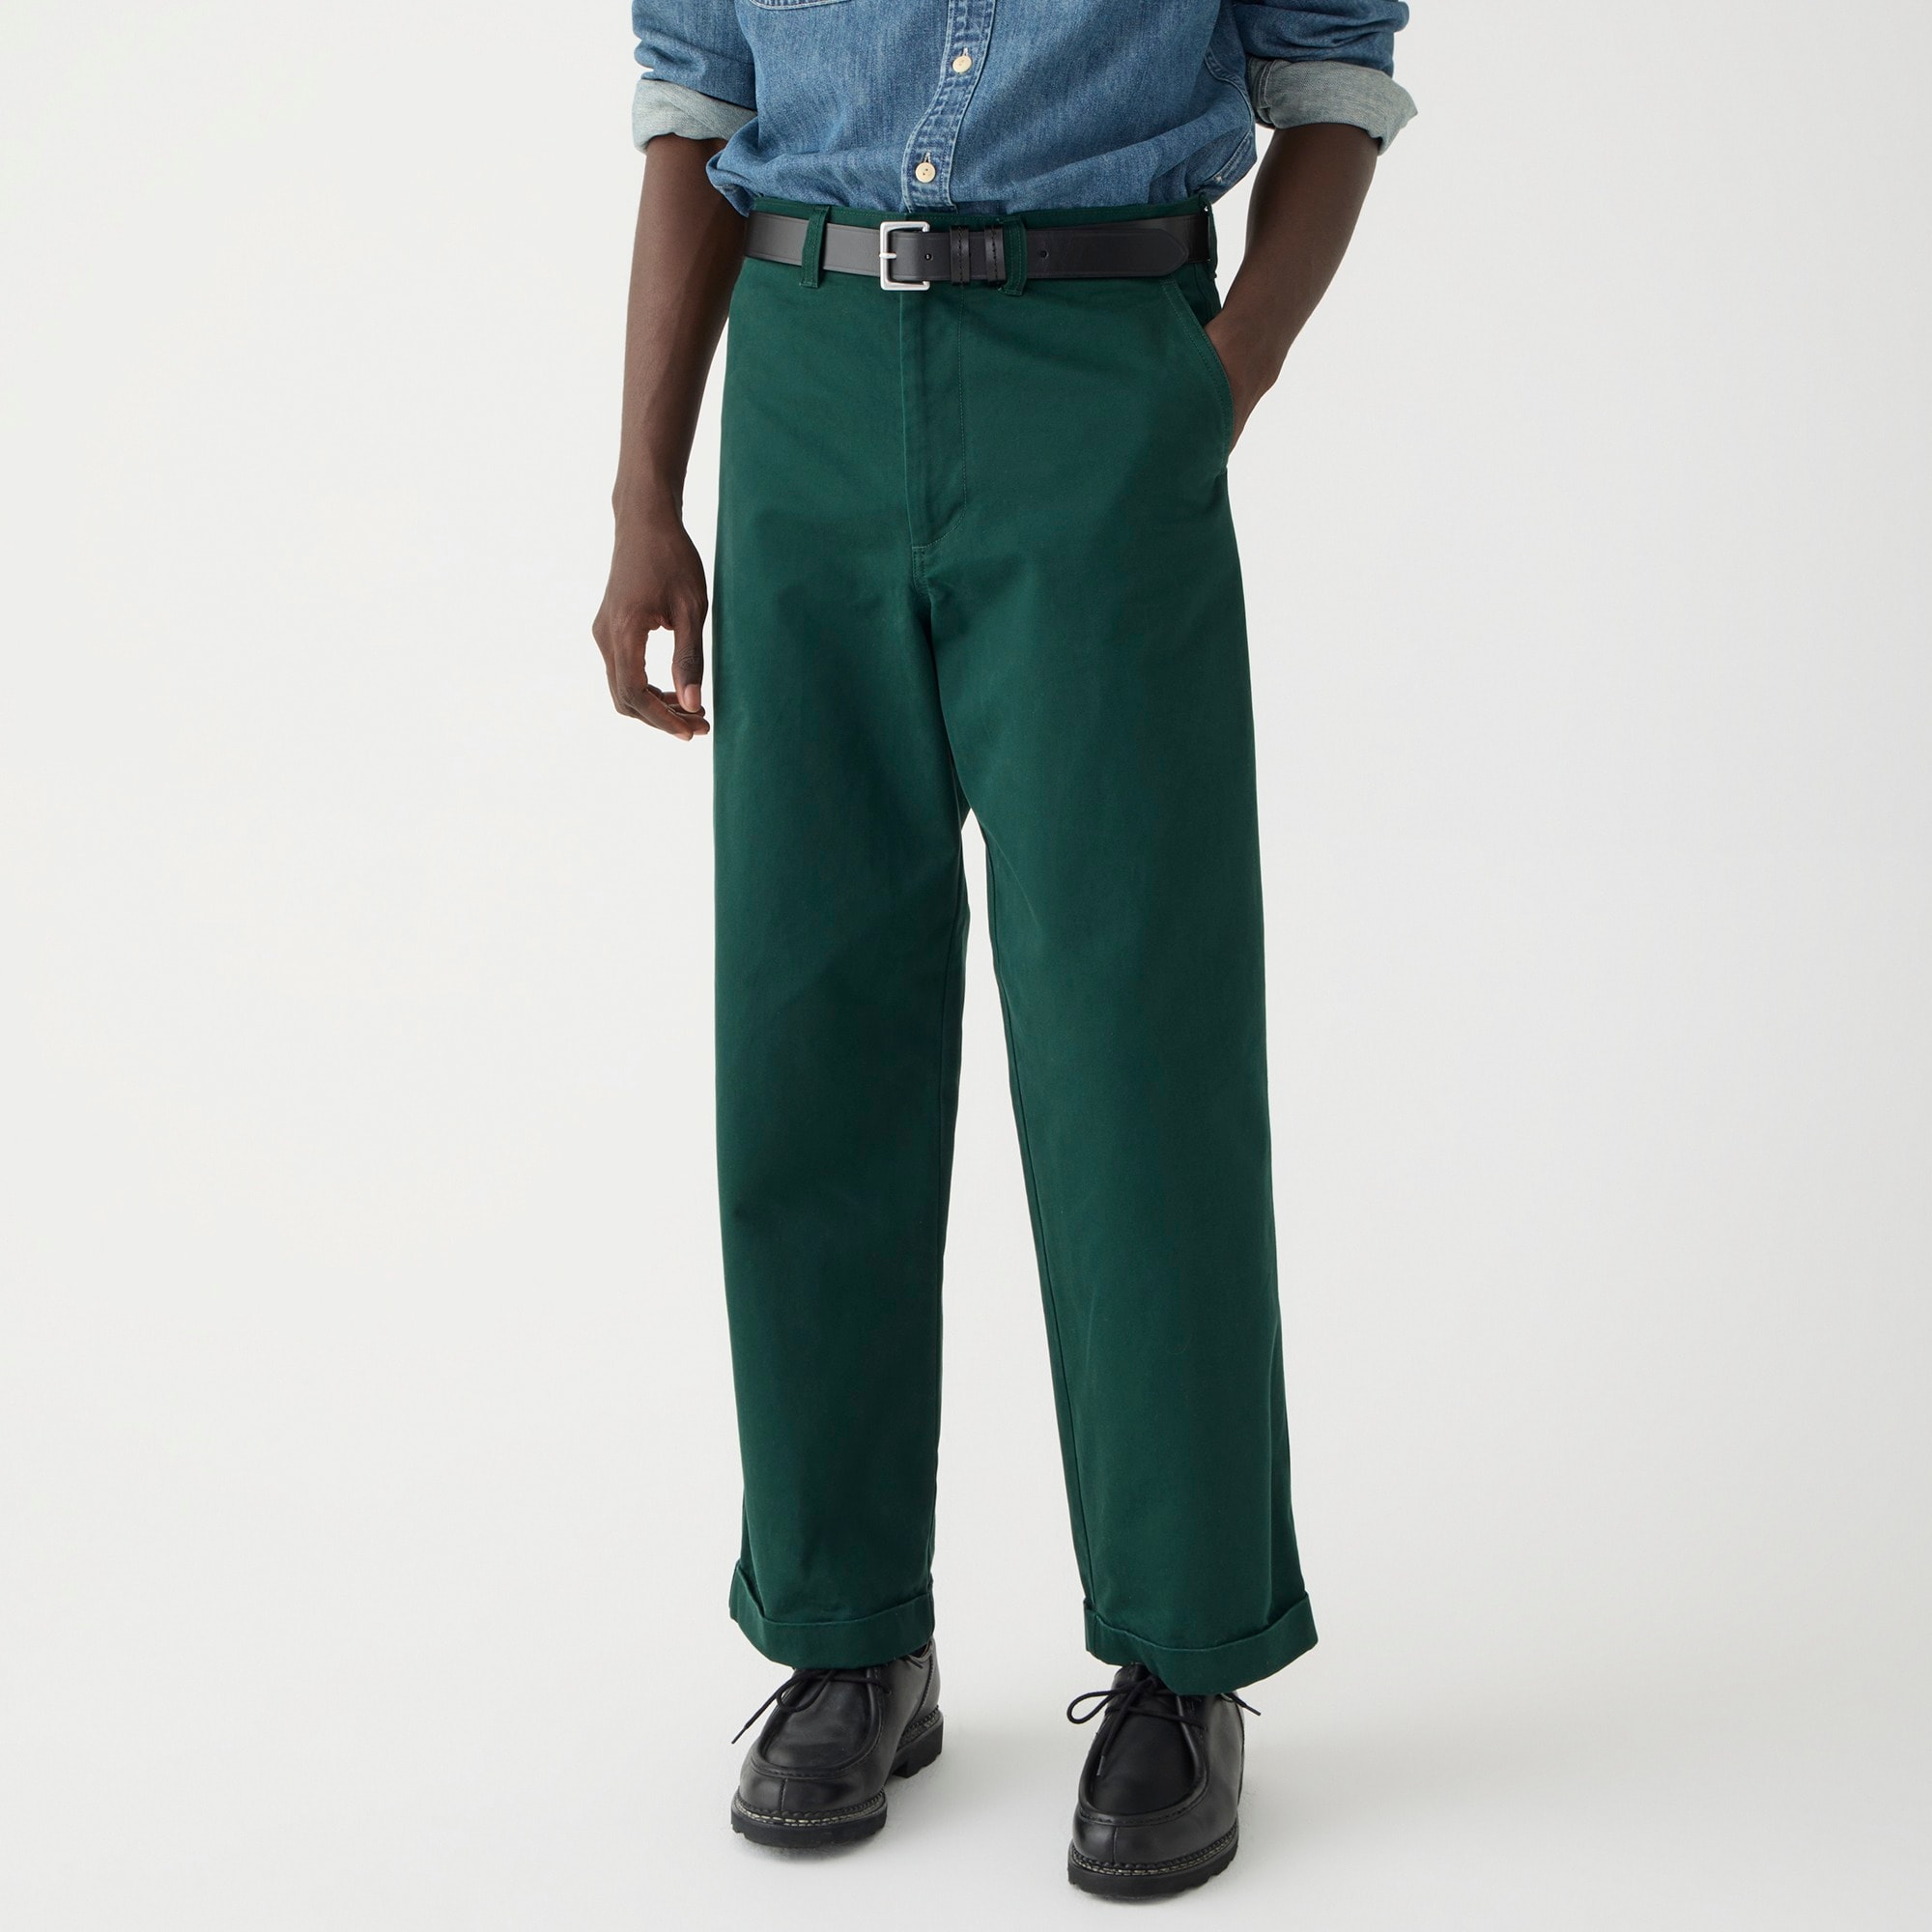  Giant-fit chino pant